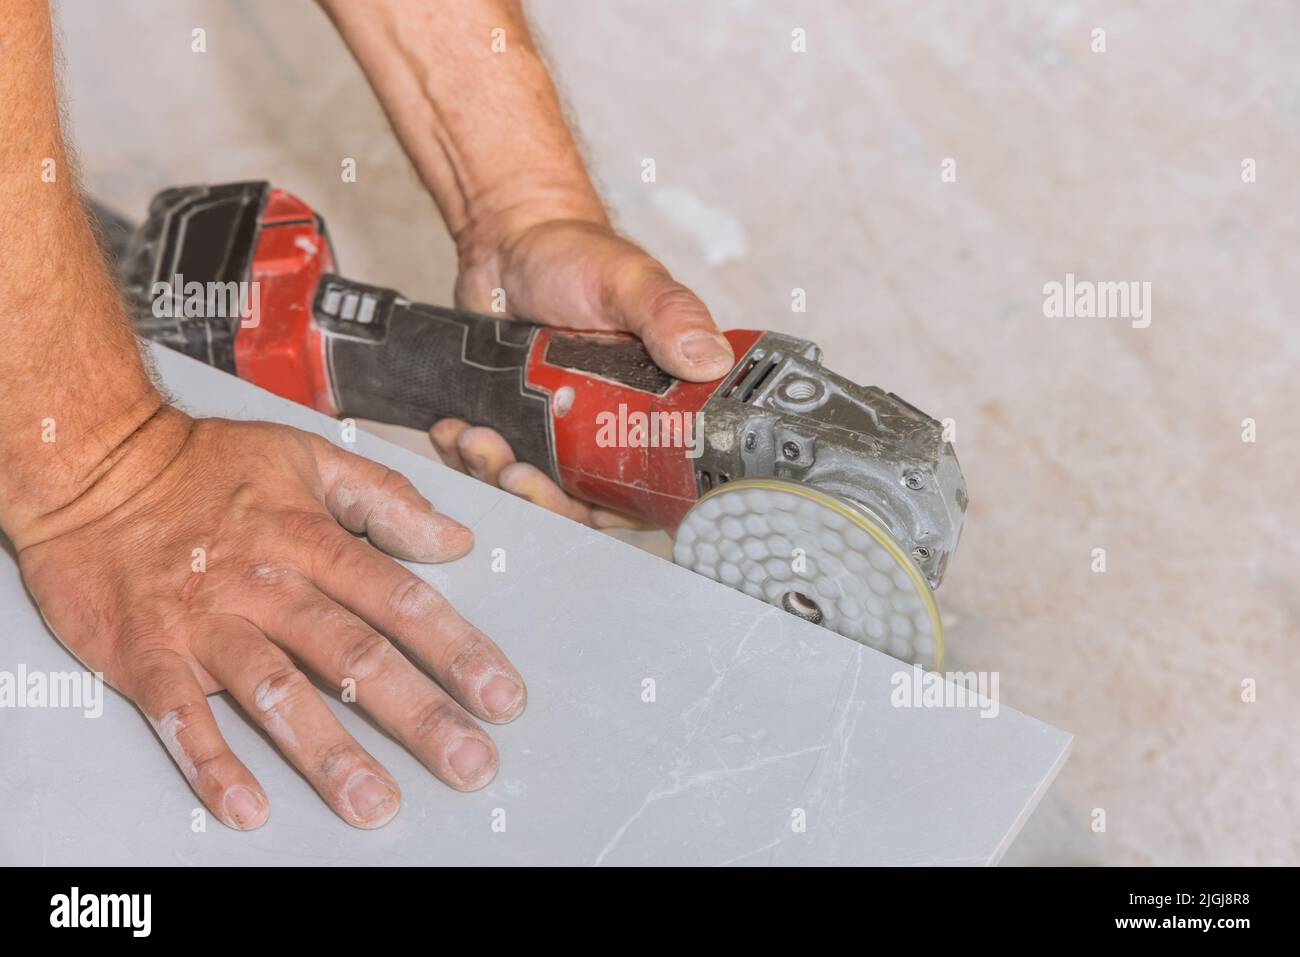 A worker polishes the corners of cut tiles with a polishing disk with diamond on an angle grinder Stock Photo